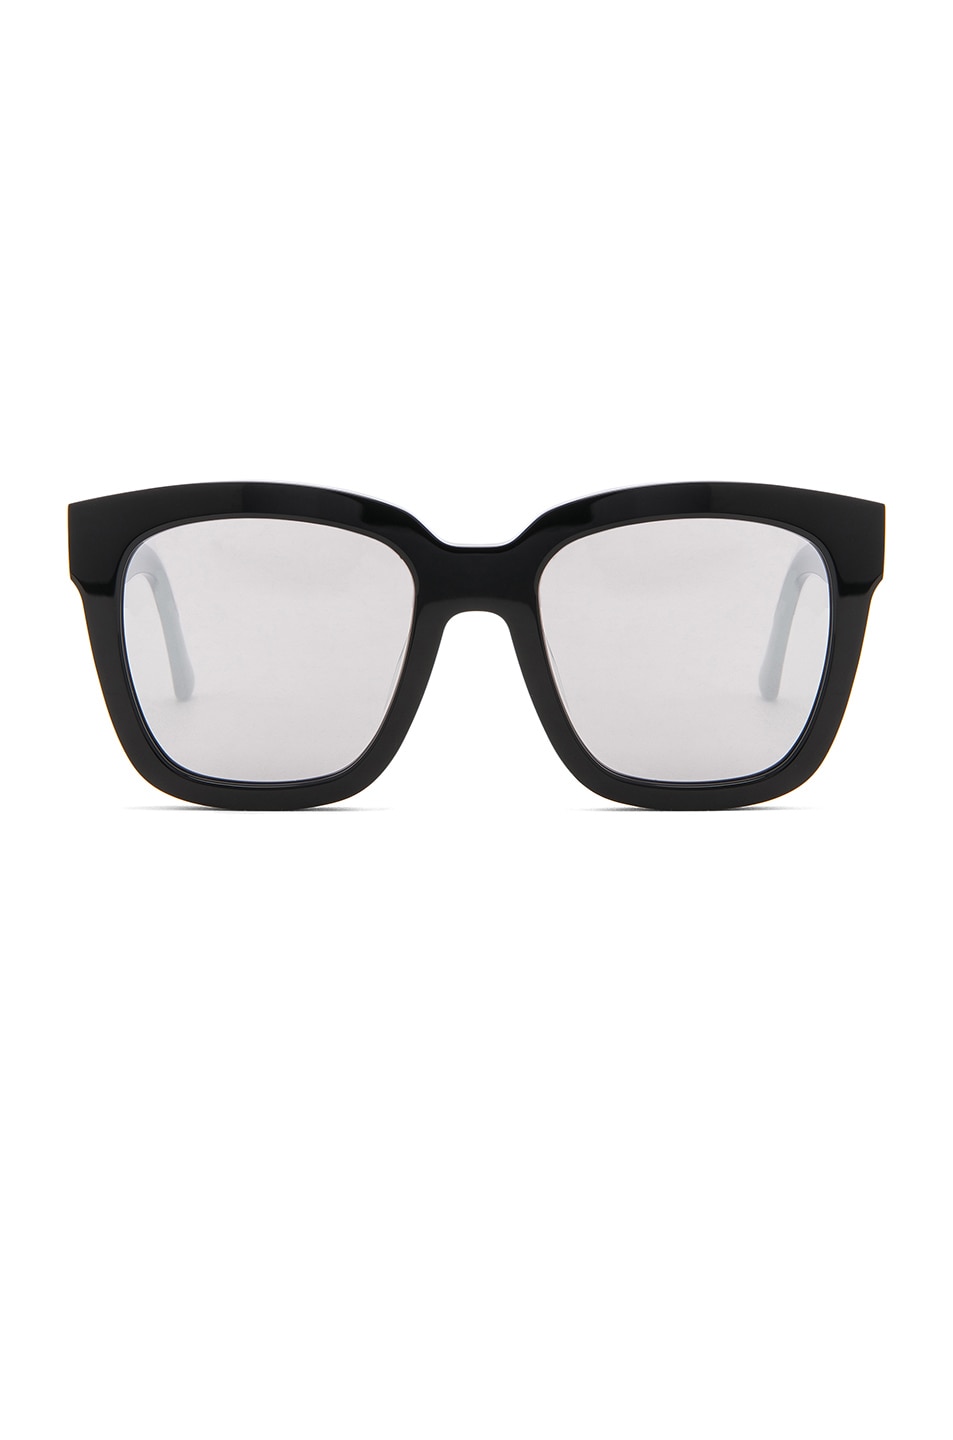 Image 1 of Gentle Monster The Dreamer Sunglasses in Black Acetate & Silver Mirror